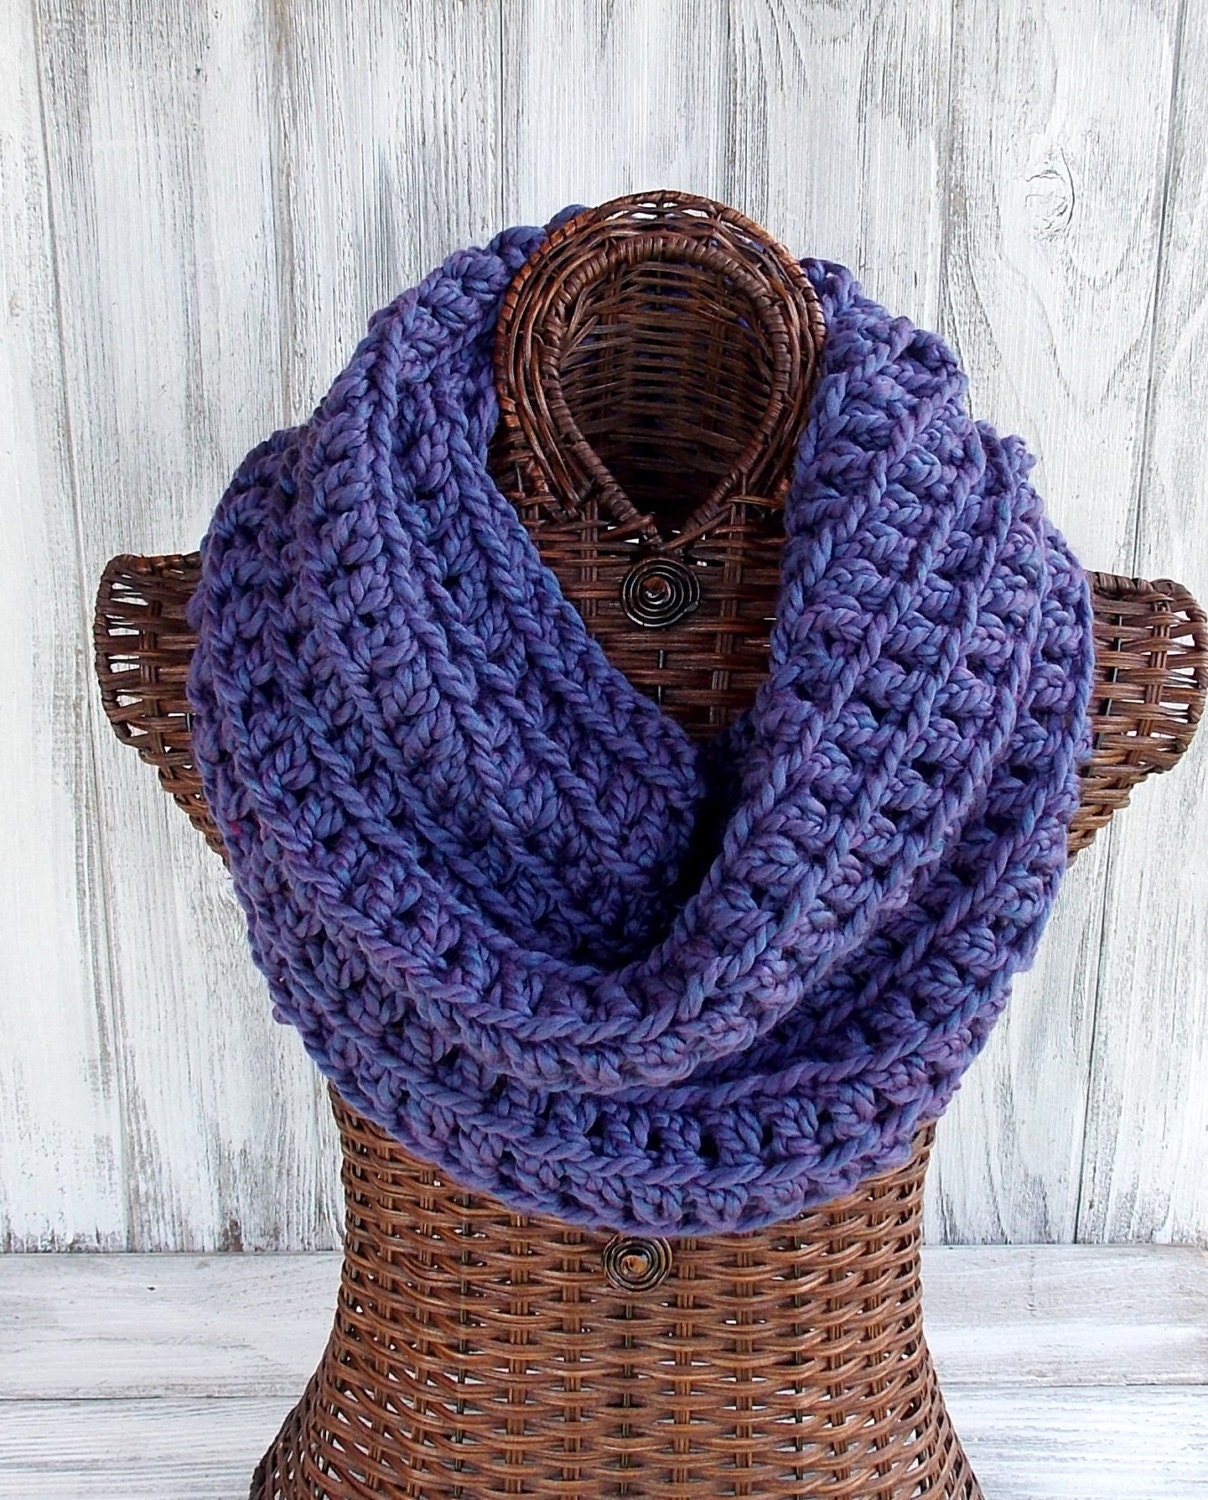 Crocheted violet cowl, chunky casual chic fashion accessory for women, one scarf donated with purchase - BelleAdora